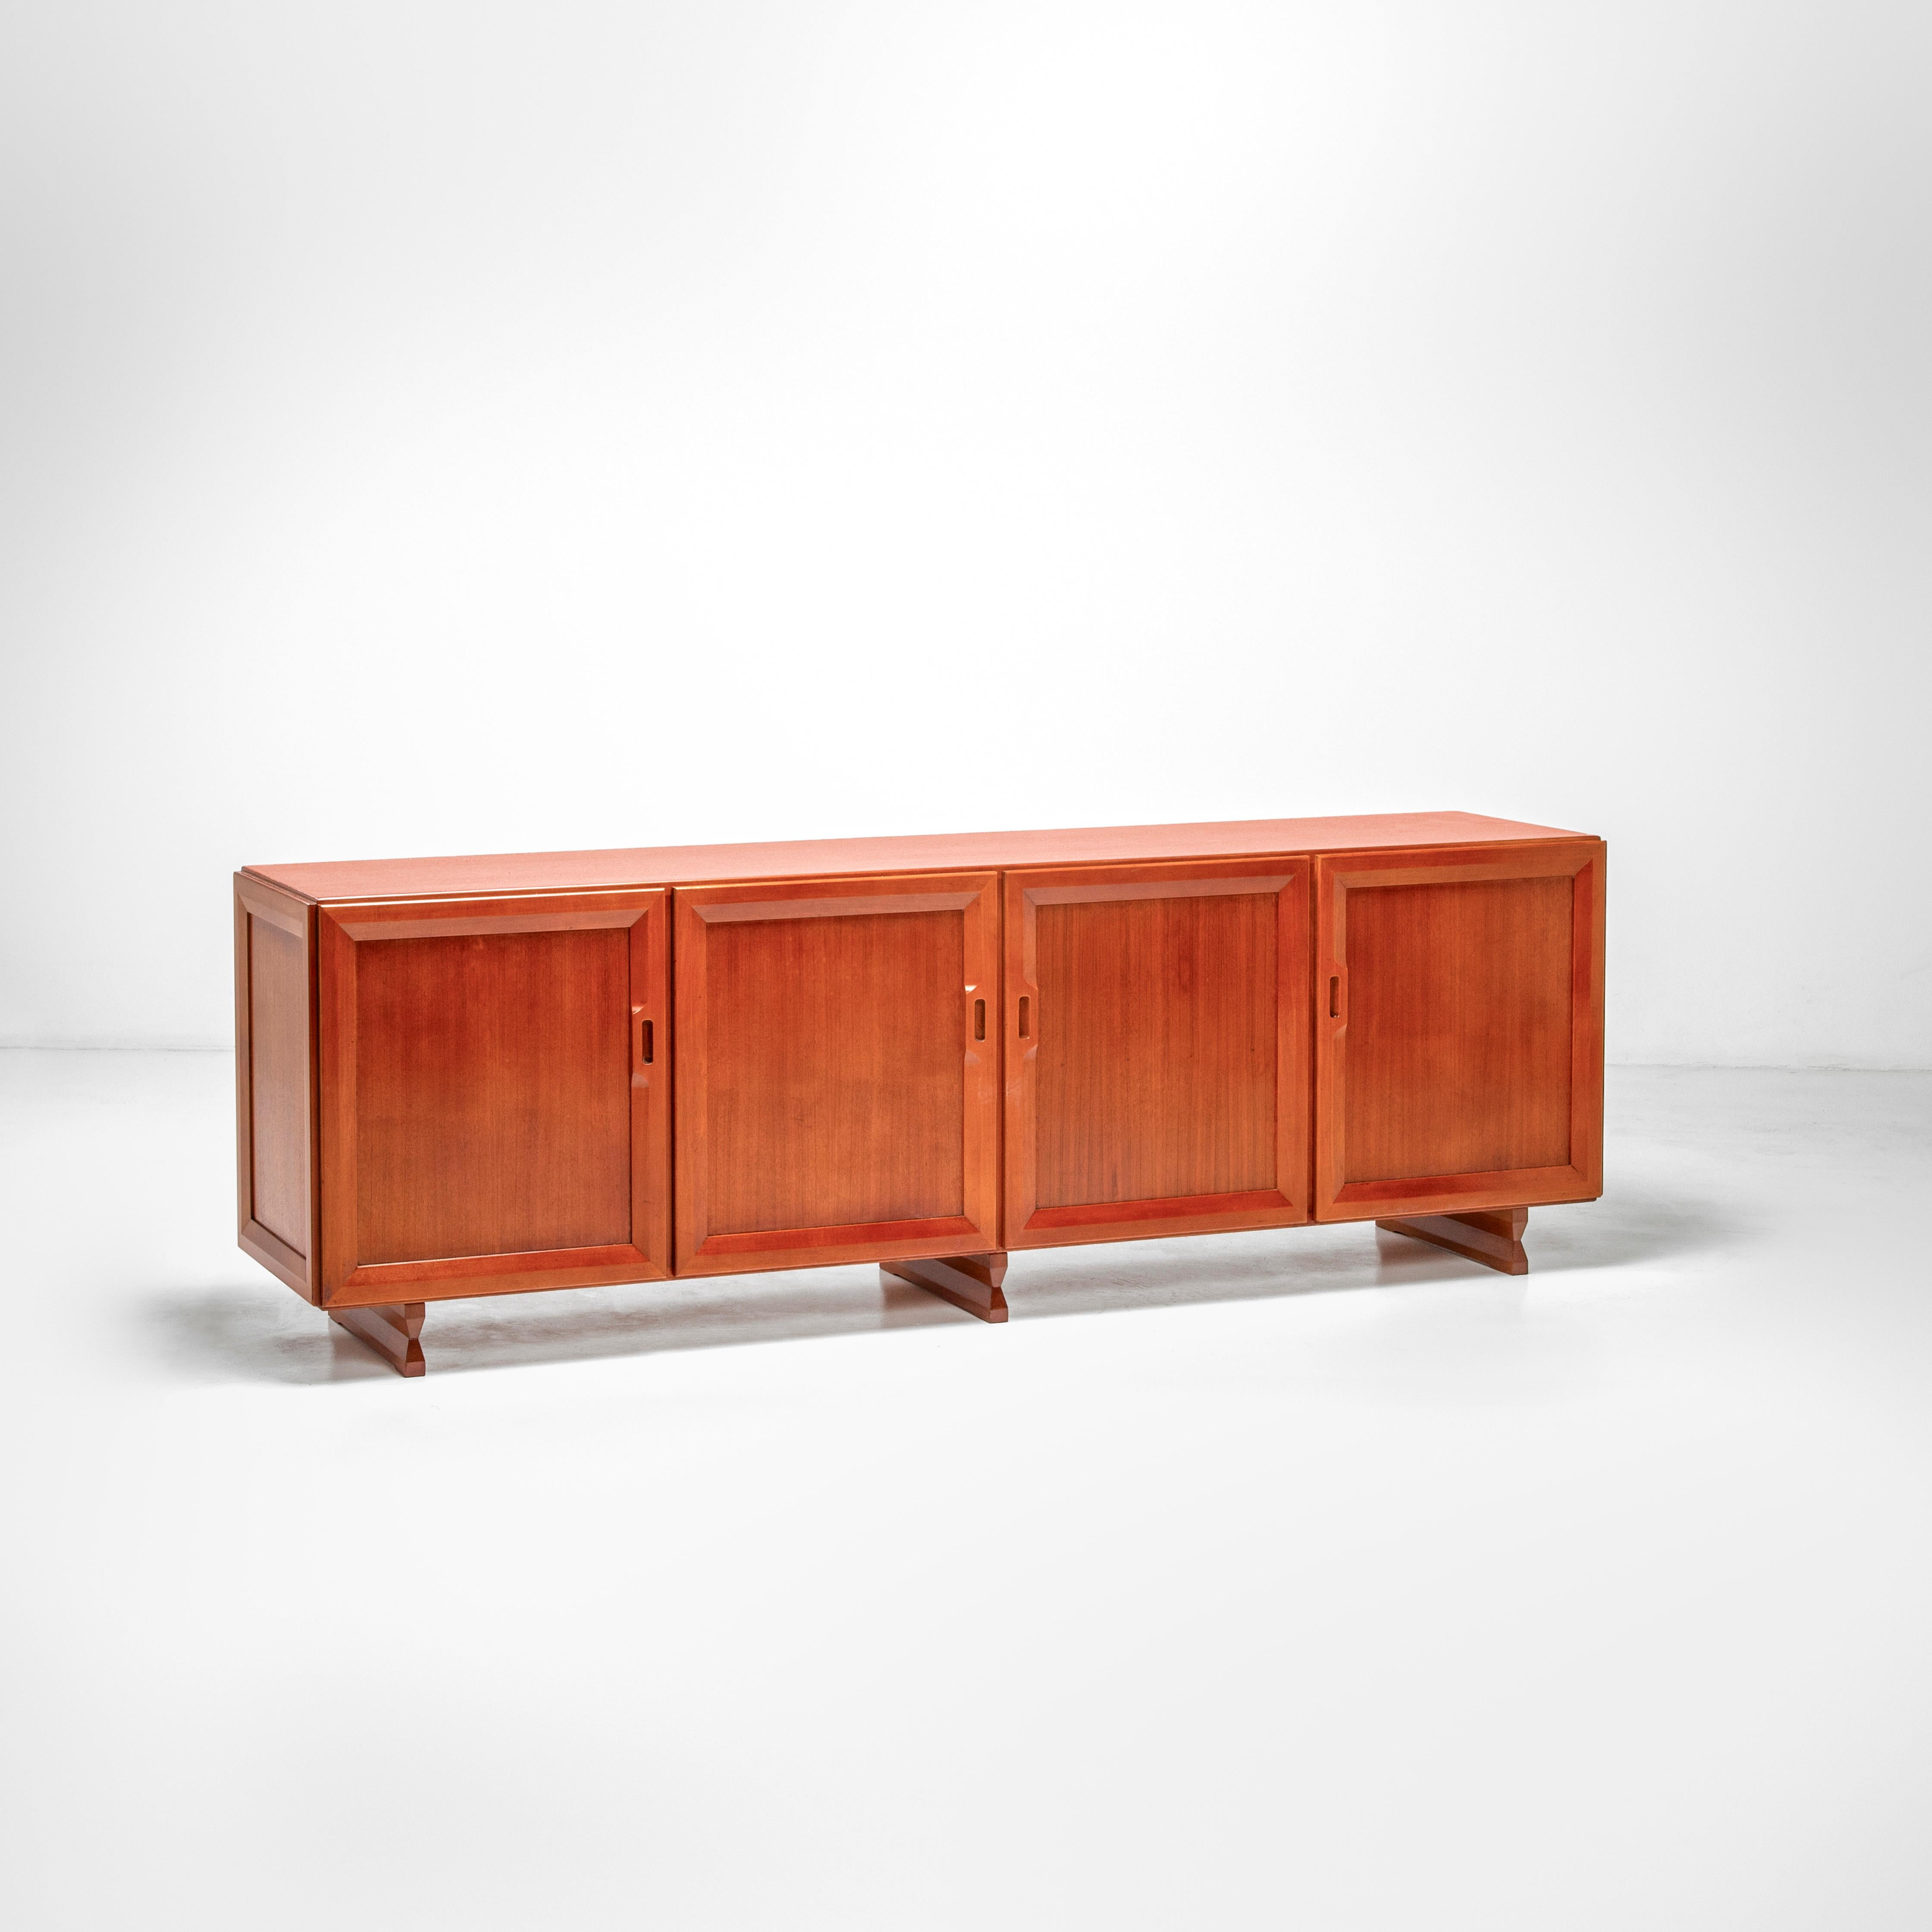 Modern sideboard by Franco Albini for Poggi - 1950s Italy. 
This design features a simplistic aesthetic with sharp lines. It has four compartments with doors. The sculptural legs give the sideboard an open and elegant appearance. The recessed